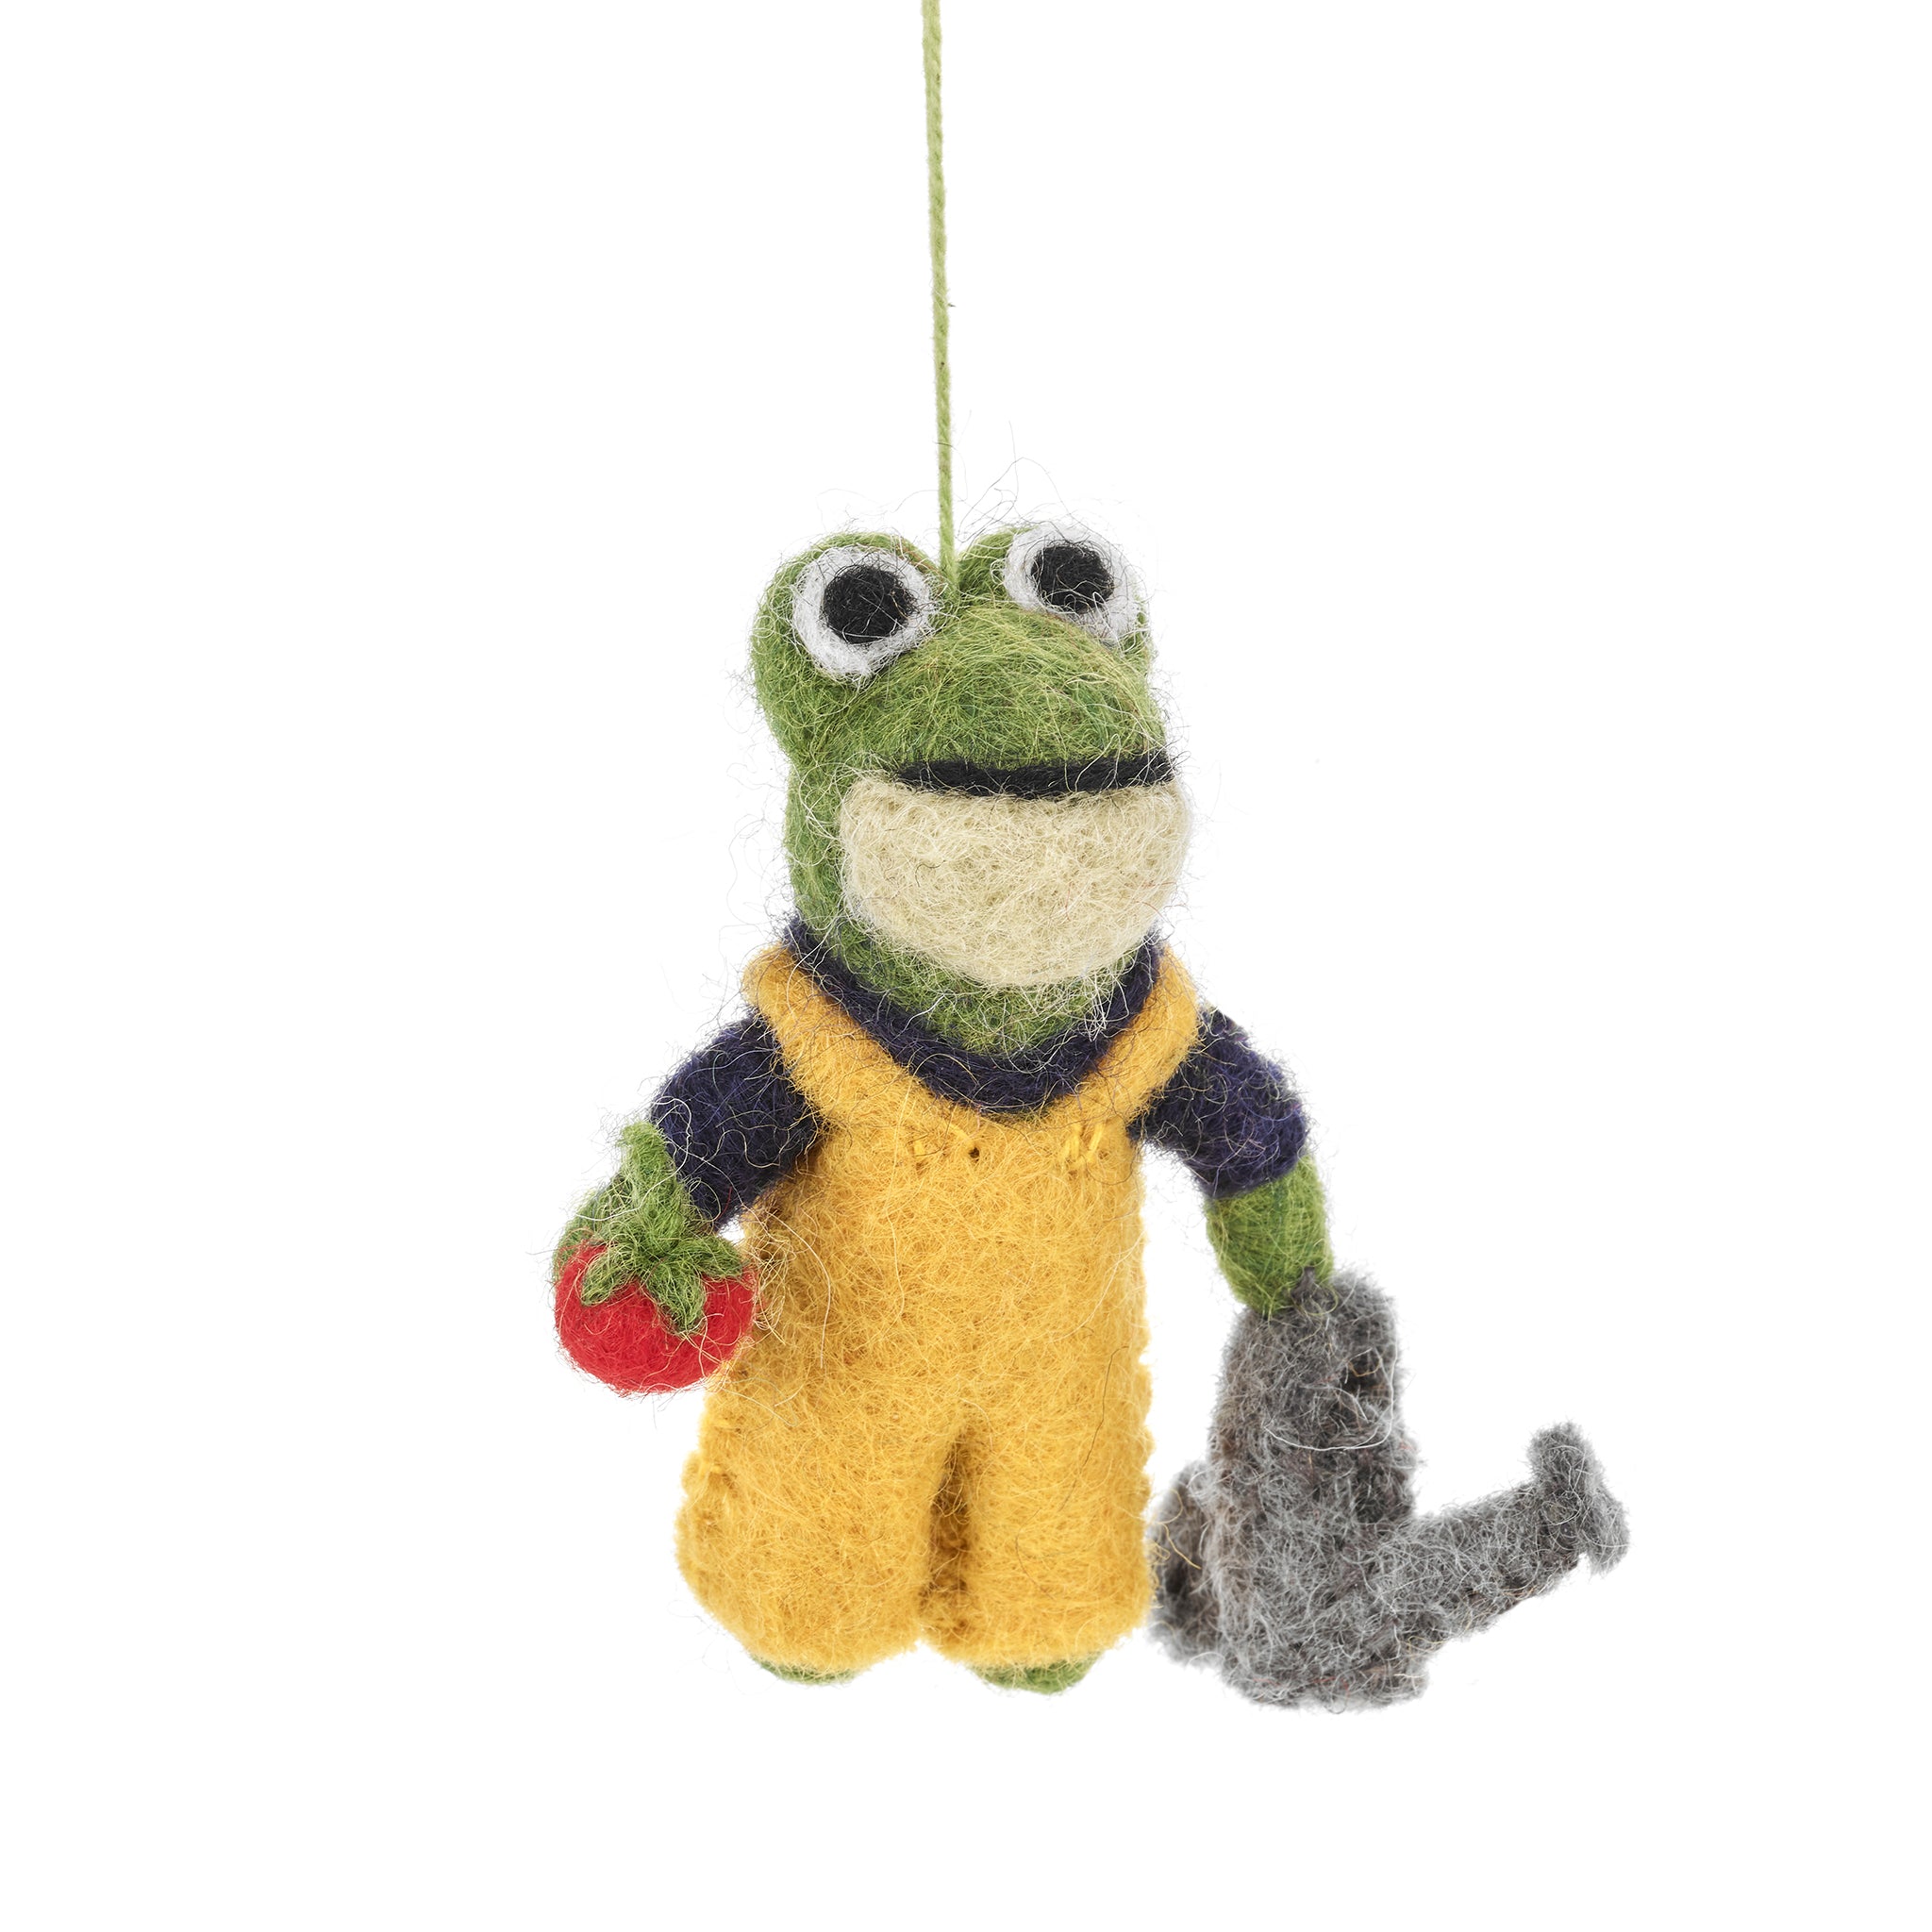 Felt So Good felted wool frog hanging decoration dressed in a a gardening outfit